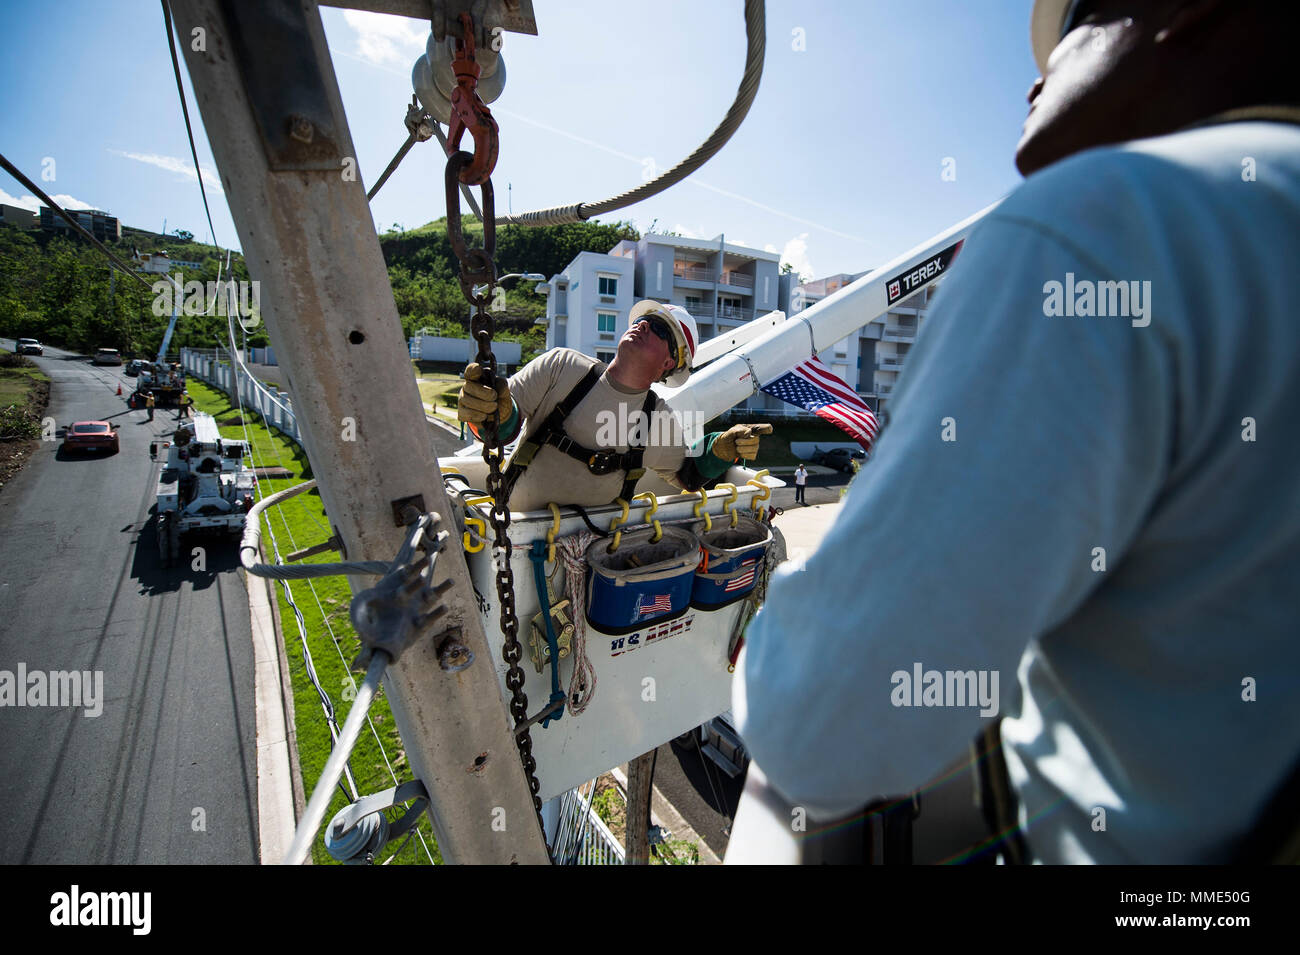 U.S. Army Sergeant Eric Elder, a power line distribution specialist assigned to Delta Company, 249th Engineer Battalion (Prime Power), Cranston, RI, inspects a damaged power line in Río Grande, Puerto Rico, Oct. 25, 2017. Hurricane Maria formed in the Atlantic Ocean and affected islands in the Caribbean Sea, including Puerto Rico and the U.S. Virgin Islands. U.S. military assets supported FEMA as well as state and local authorities in rescue and relief efforts.   (U.S. Air Force photo by Tech. Sgt. Larry E. Reid Jr.) Stock Photo